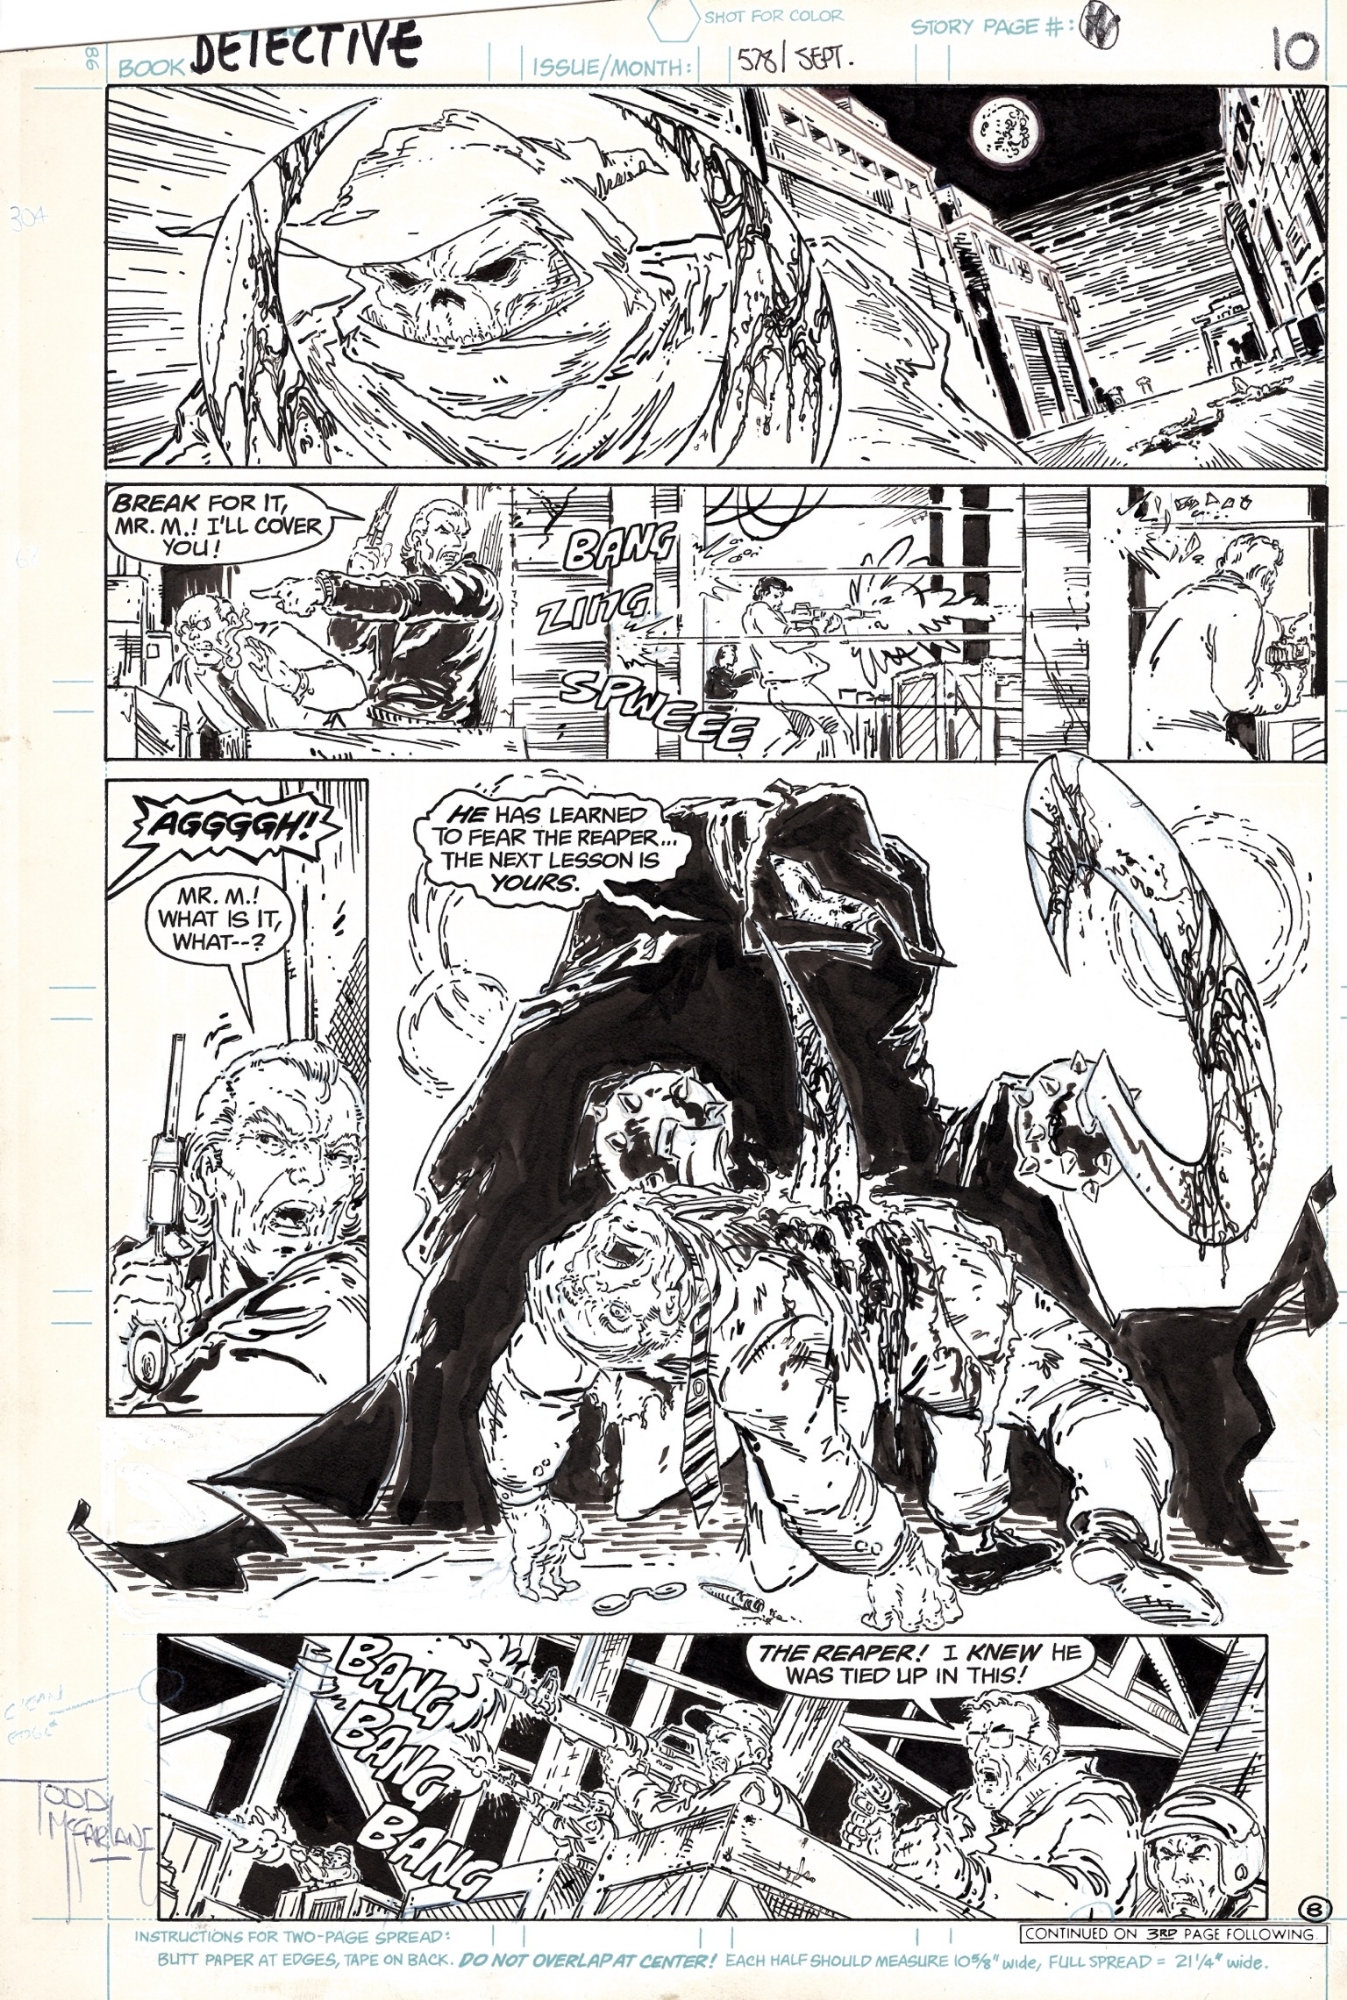 Detective Comics #578 p. 8 by Todd McFarlane - Batman Year Two, in Daryl  R's Detective Comics published pages ? ? Comic Art Gallery Room